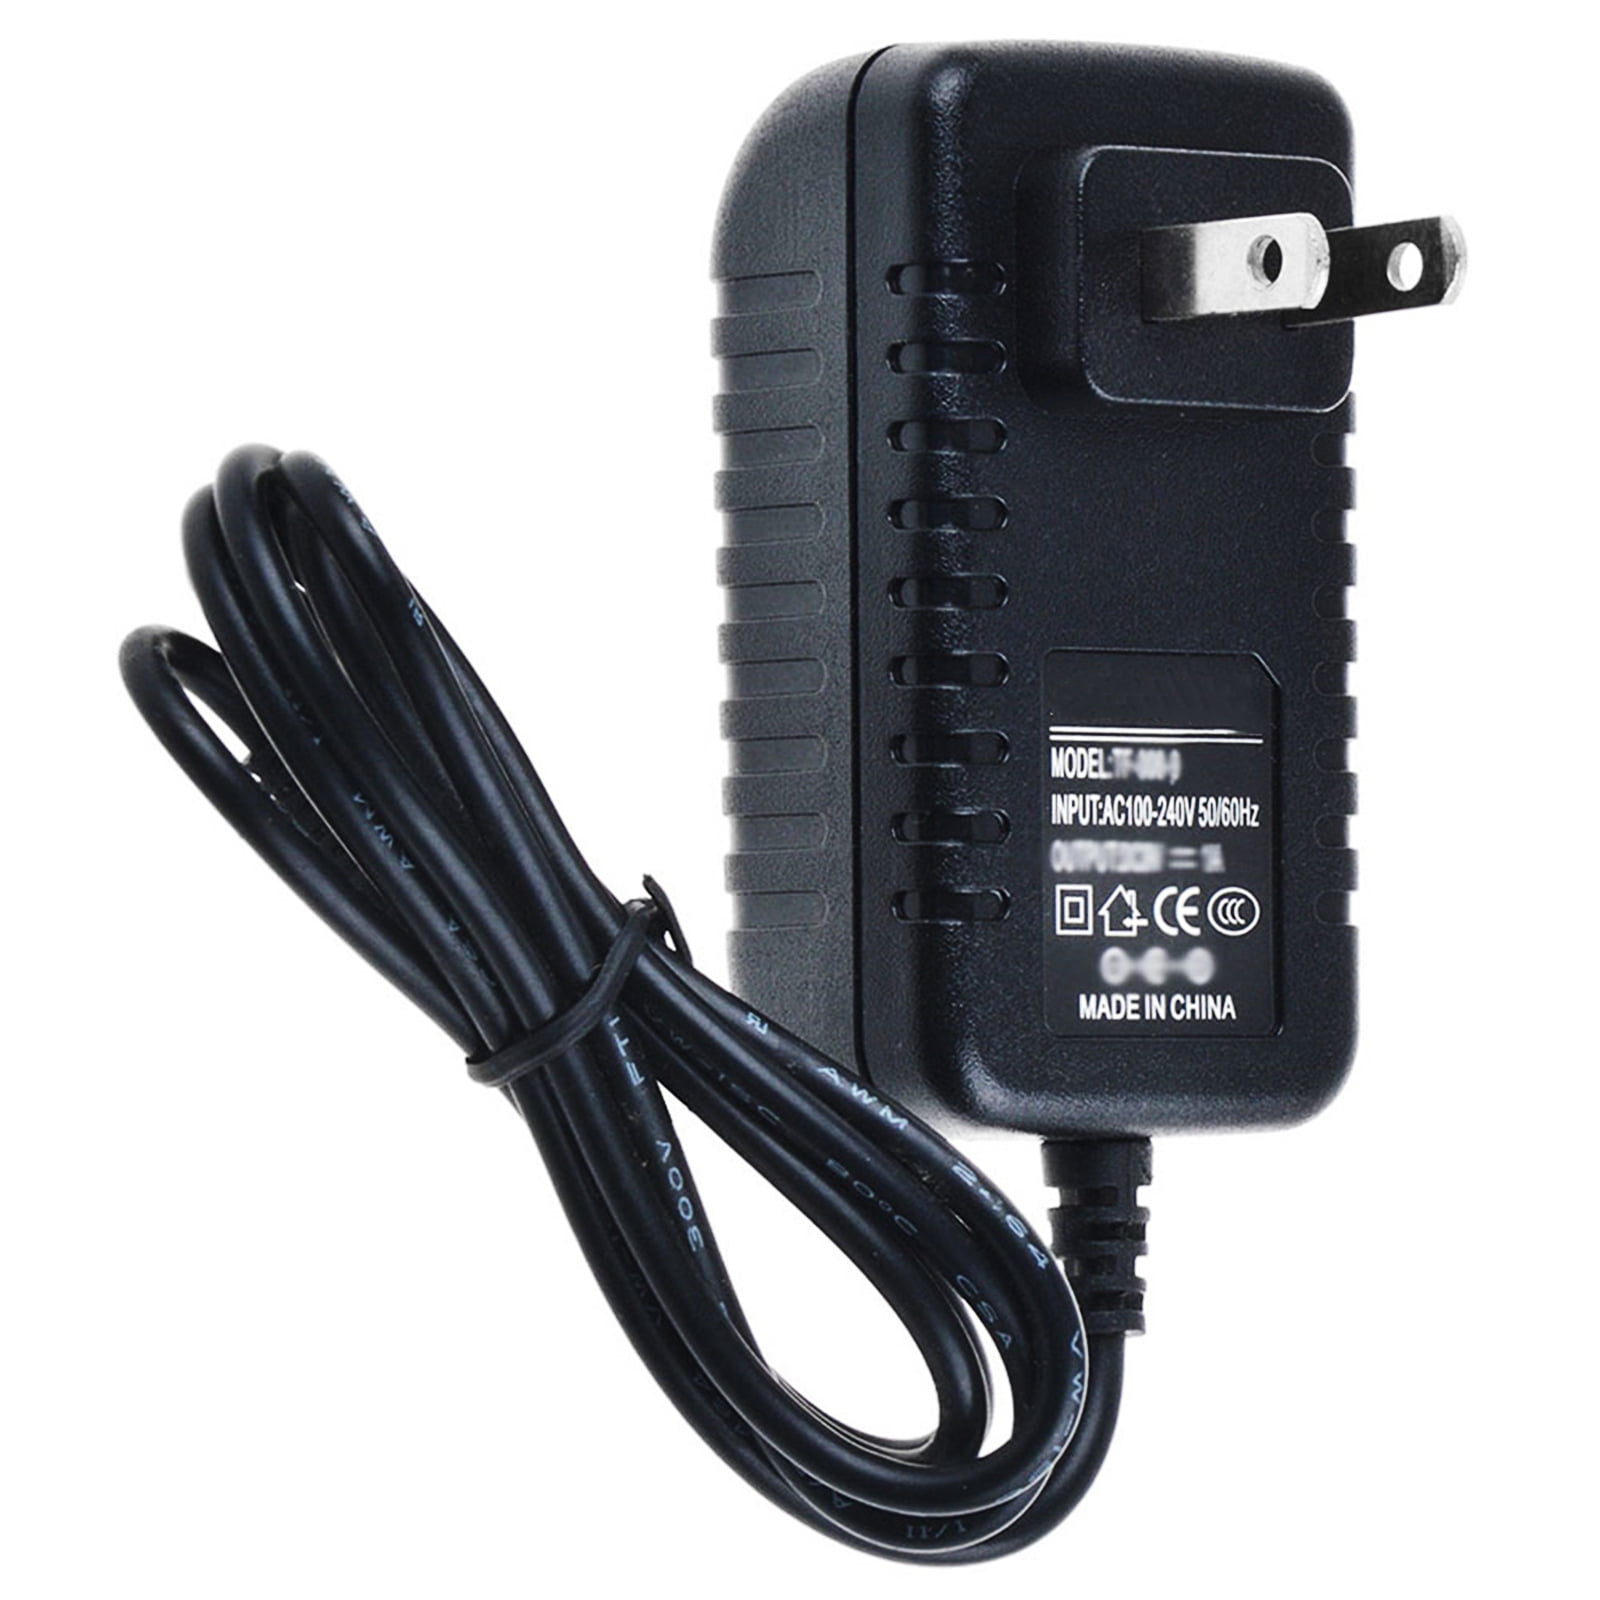 CAR charger adapter for 62749 Harbor Freight tool Viking jump starter power pack 